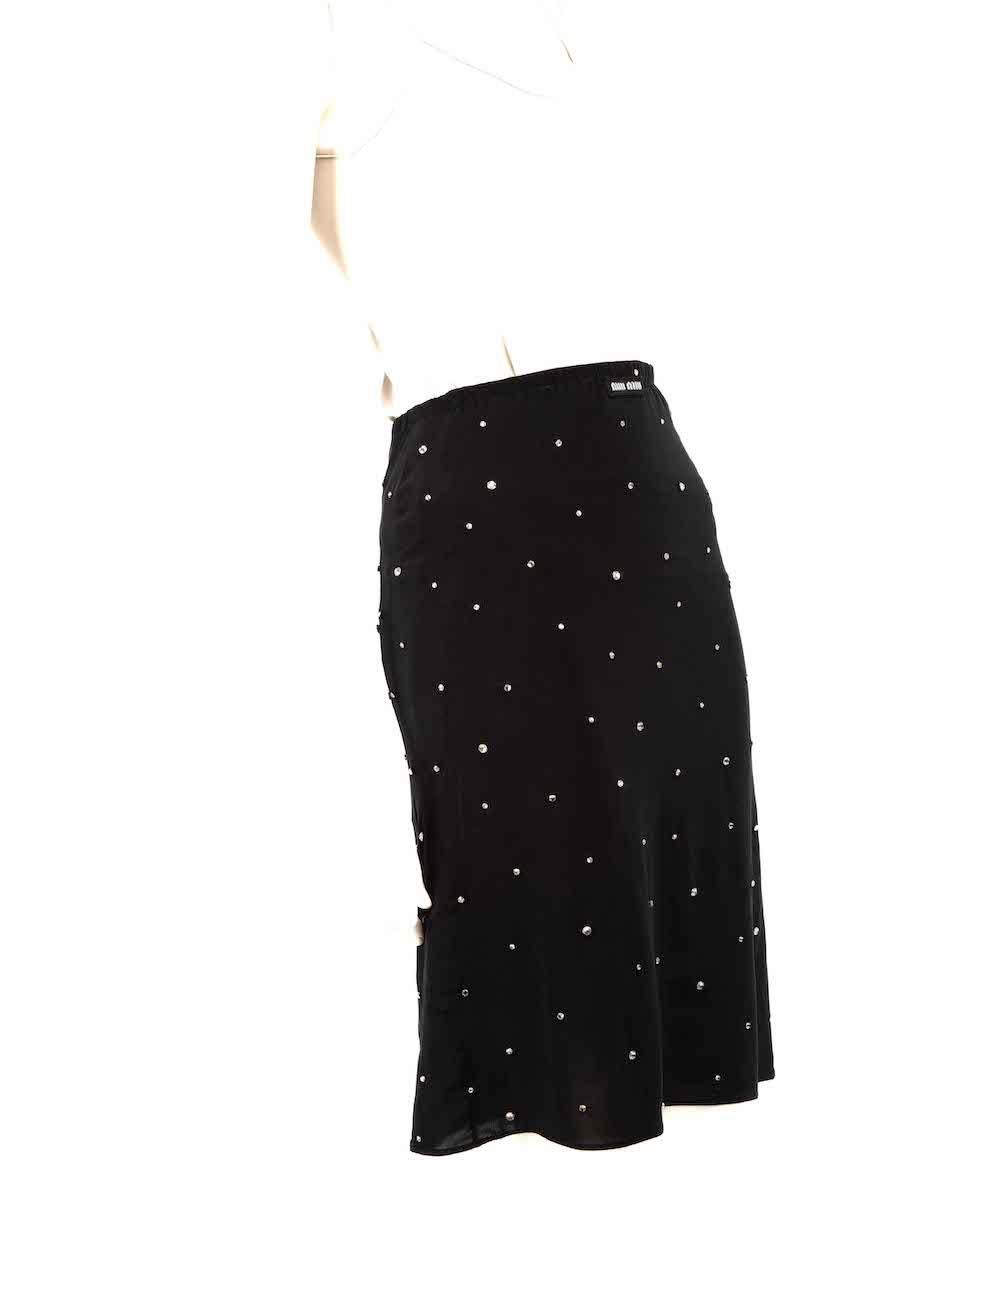 CONDITION is Very good. Minimal wear to skirt is evident. Minimal wear to the sides is seen with pulls to the weave and a small hole in the waistband on this used Miu Miu designer resale item.
 
 
 
 Details
 
 
 Black
 
 Synthetic
 
 Skirt
 
